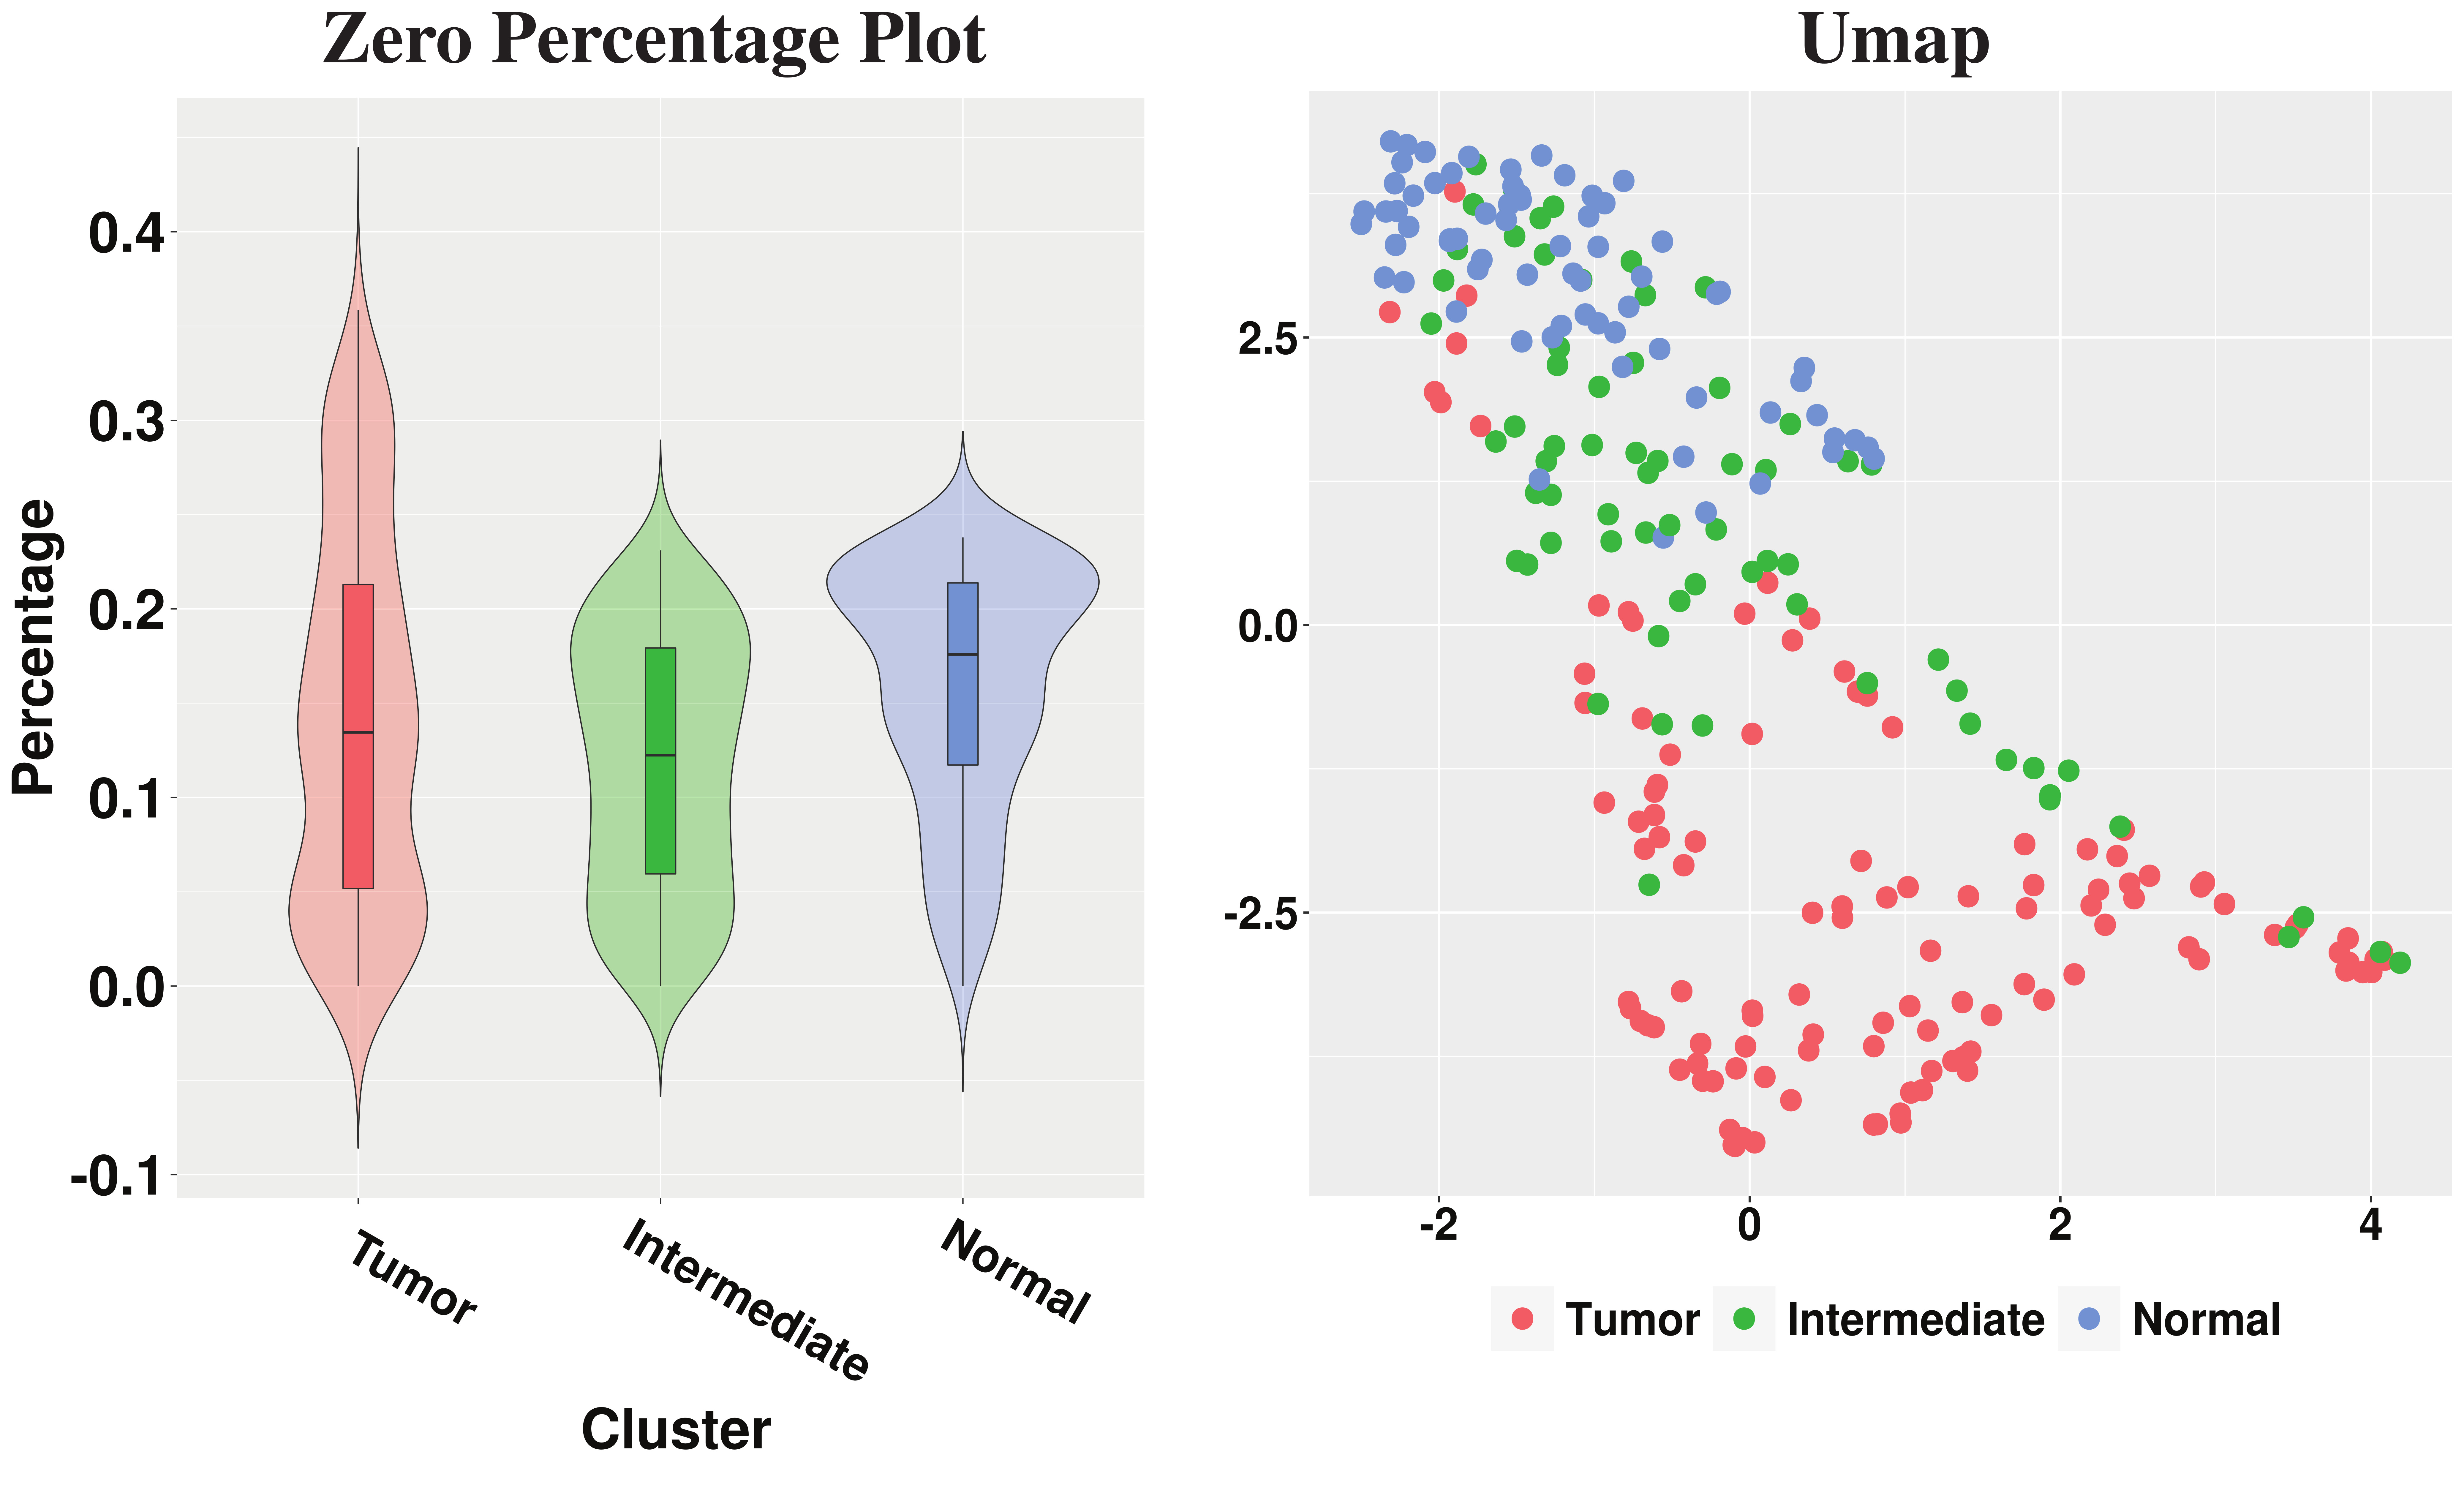 On the left panel, we have violin plot of percentage of zero reads among the genes for each cluster w.r.t. Breast Cancer data and the Umap is shown on the right panel.